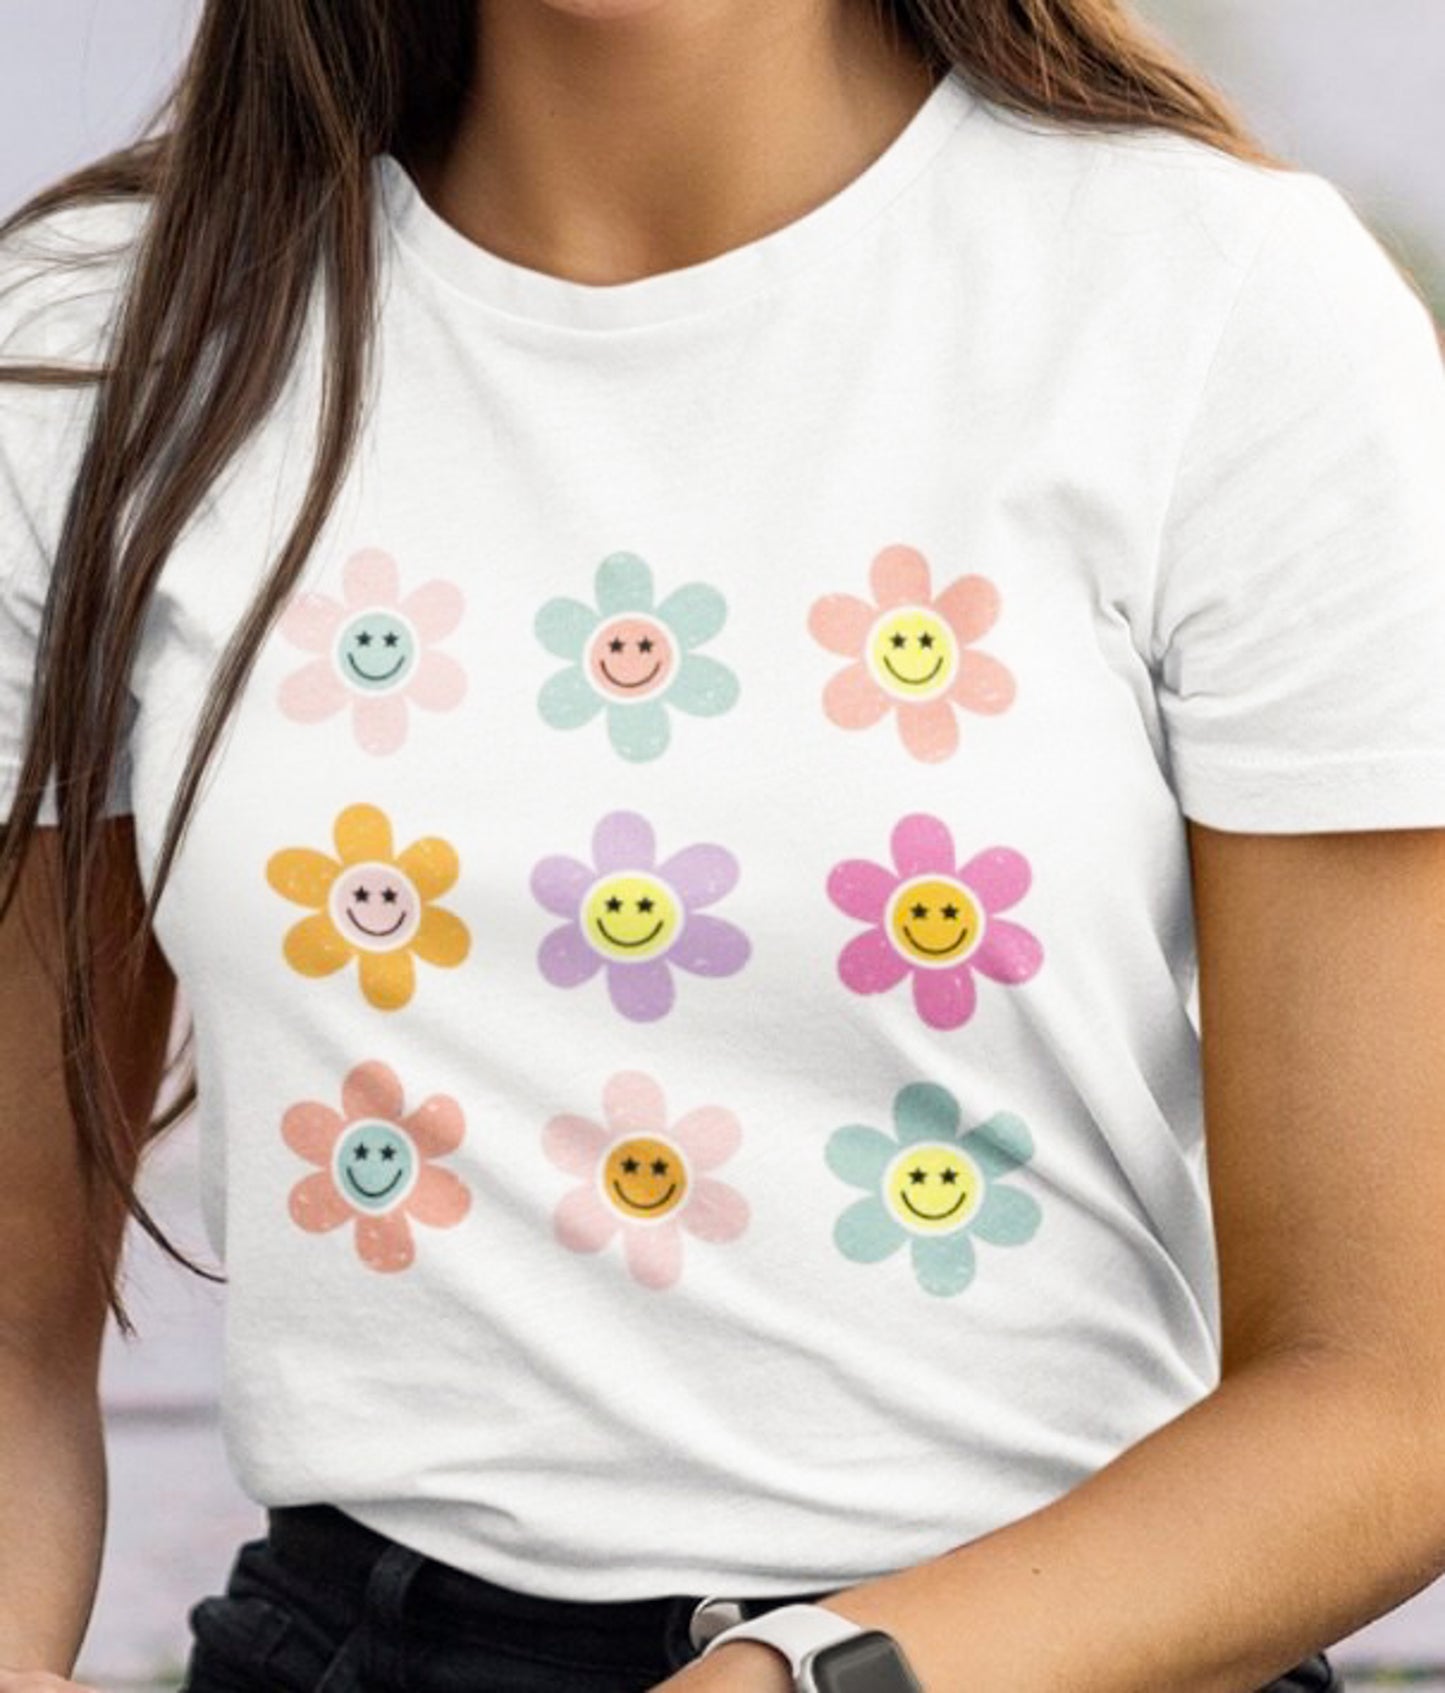 Flower Smiley Faces Tee